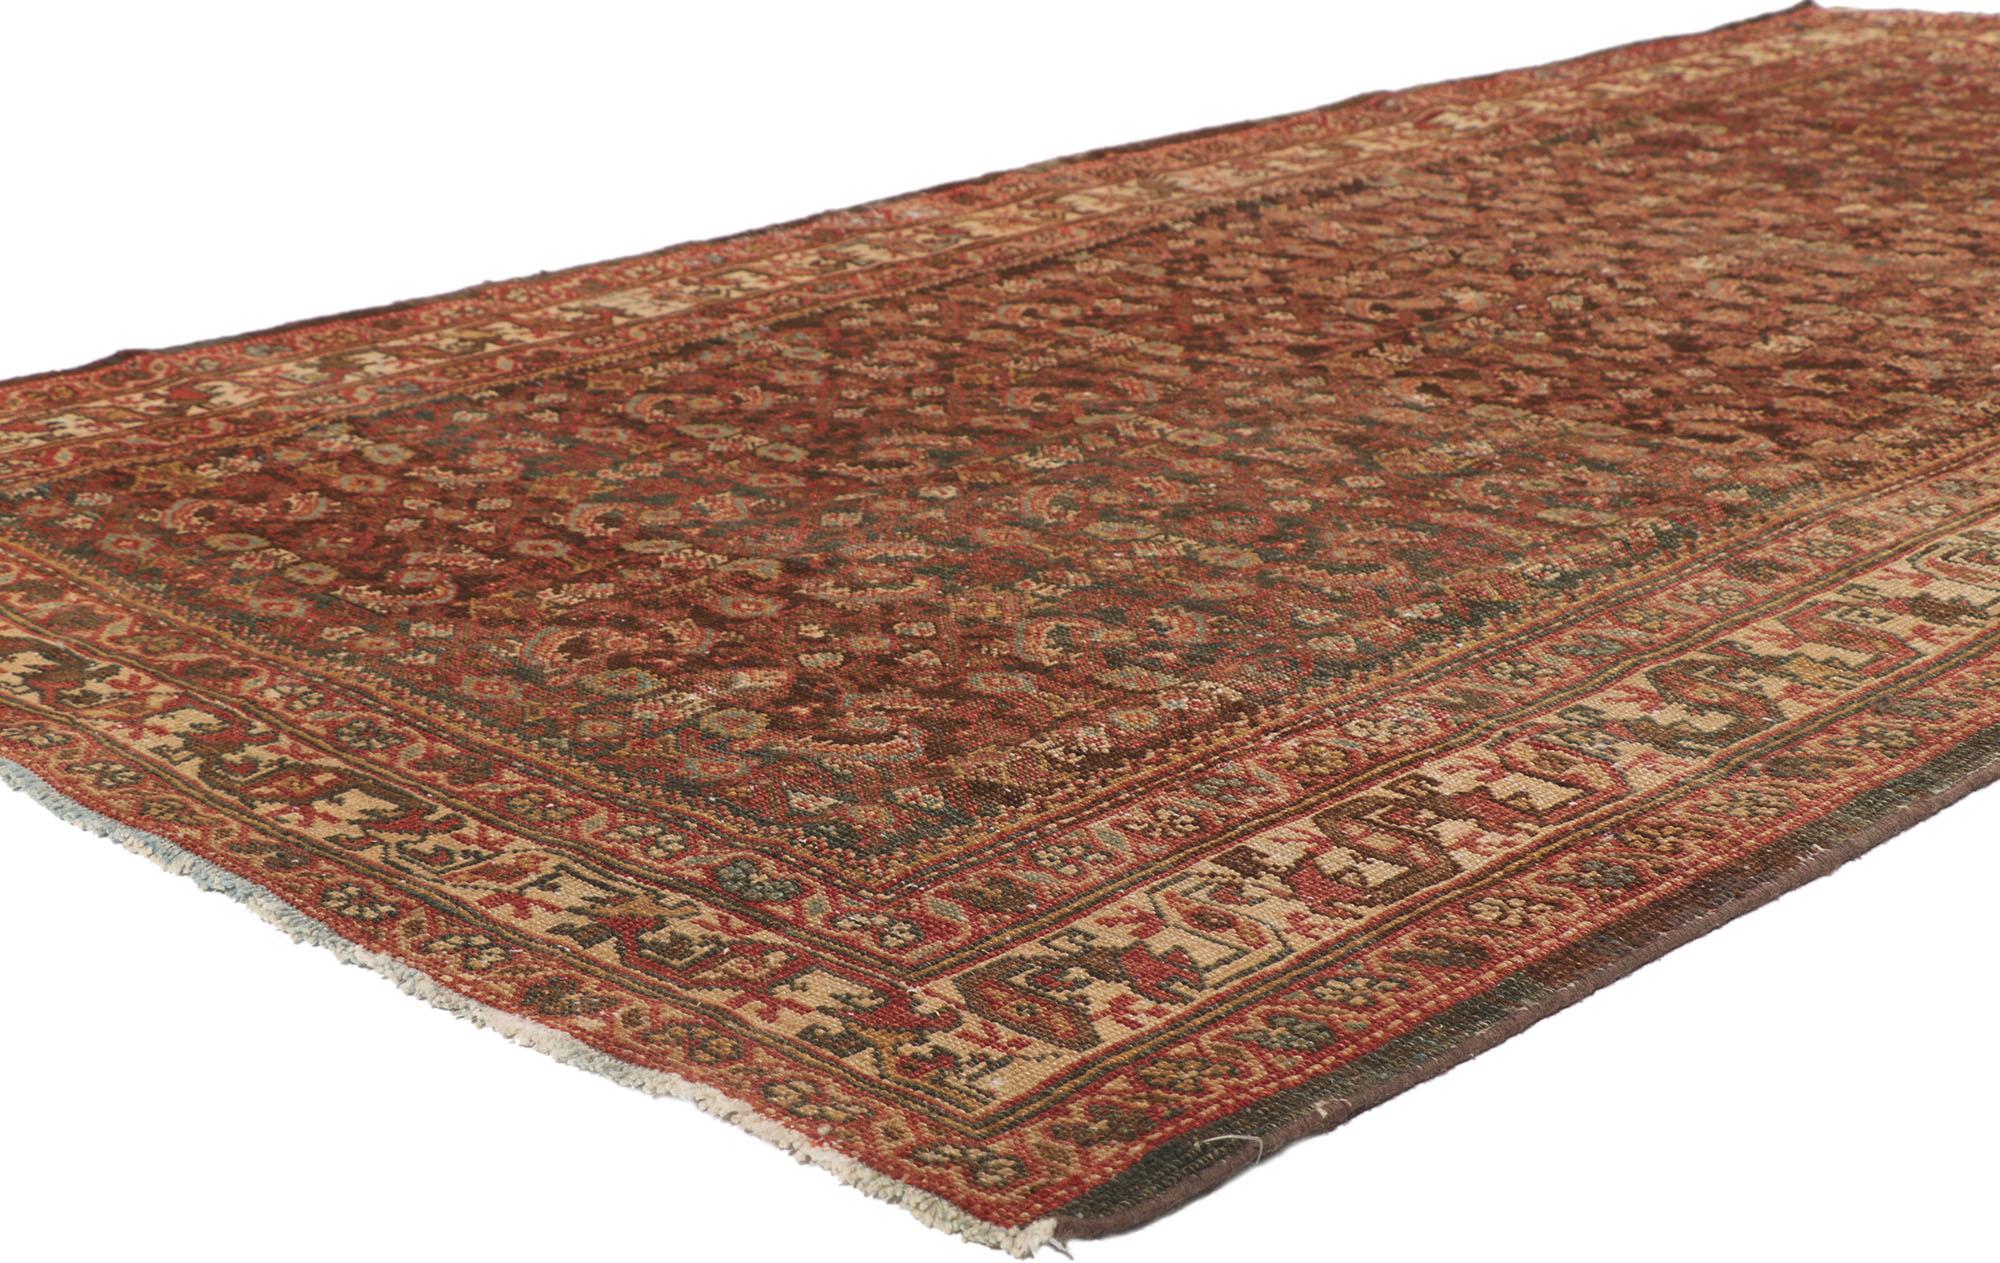 53755 antique Persian Mahal Gallery Rug 05'03 x 09'11. Emanating sophistication and nomadic charm with rustic sensibility, this hand knotted wool antique Persian Mahal rug beautifully embodies a Mid-Century Modern style. The striated and abrashed